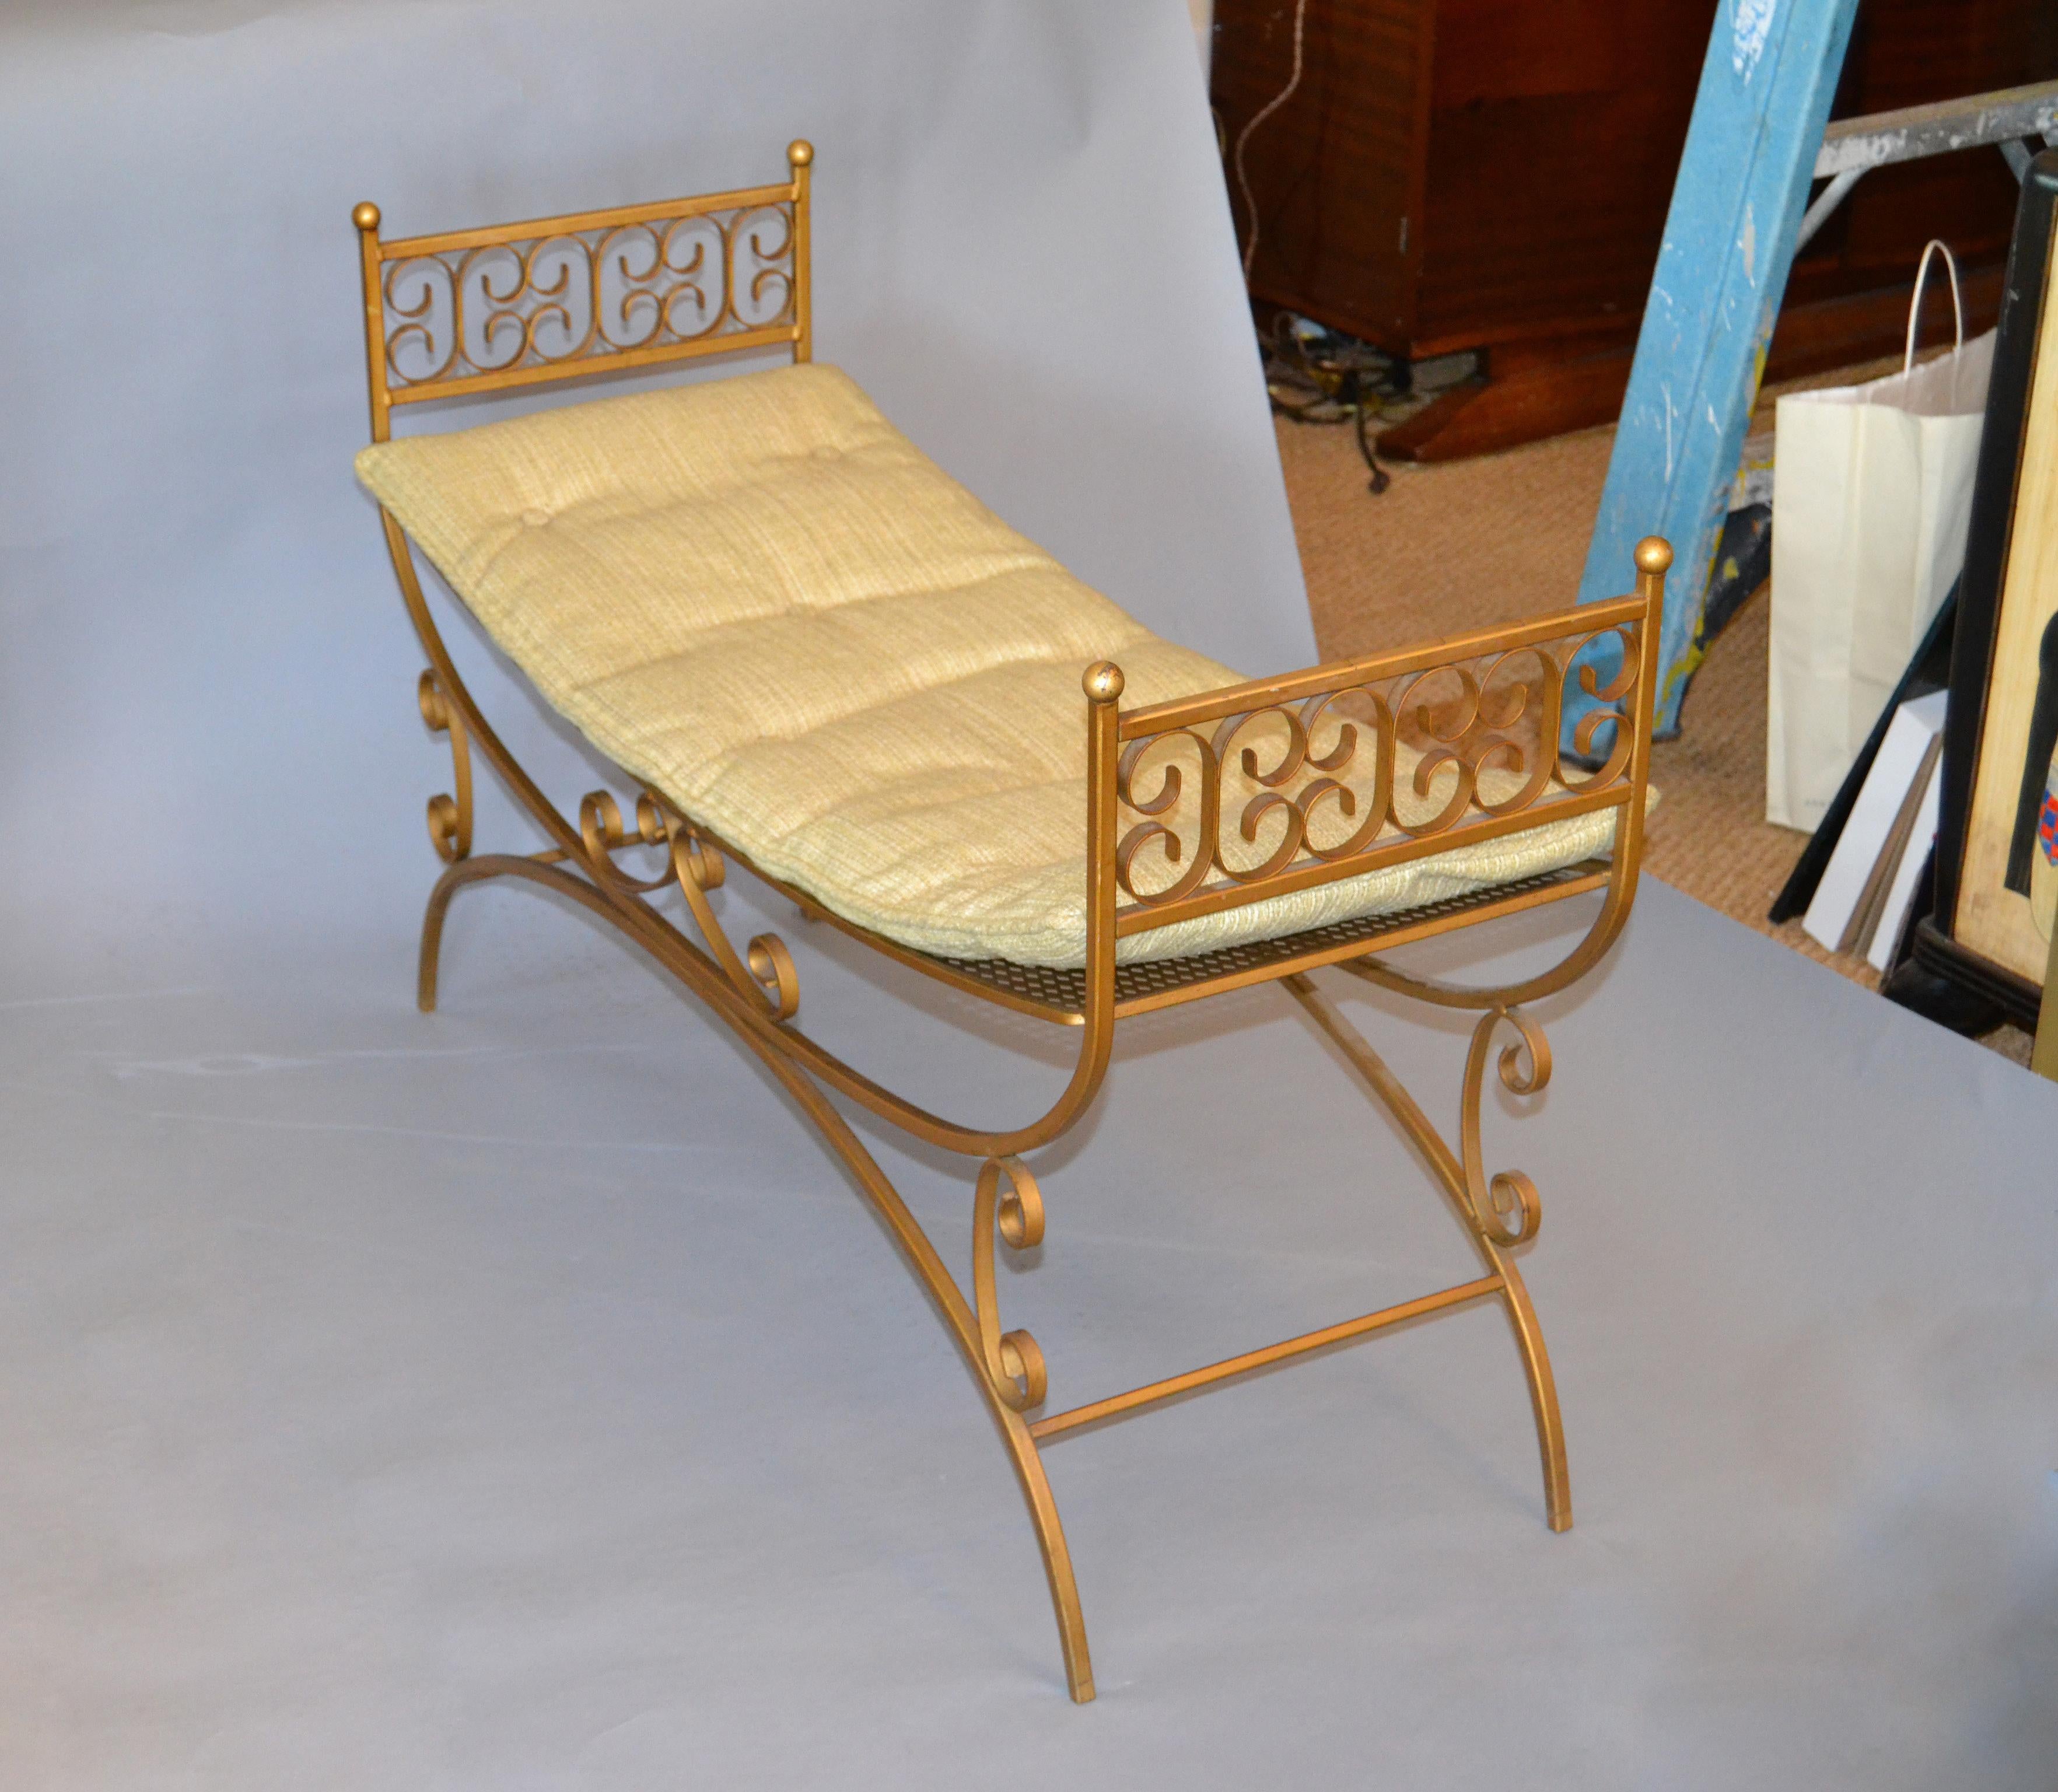 Neoclassical Golden Wrought Iron Bench with Cushions For Sale 2